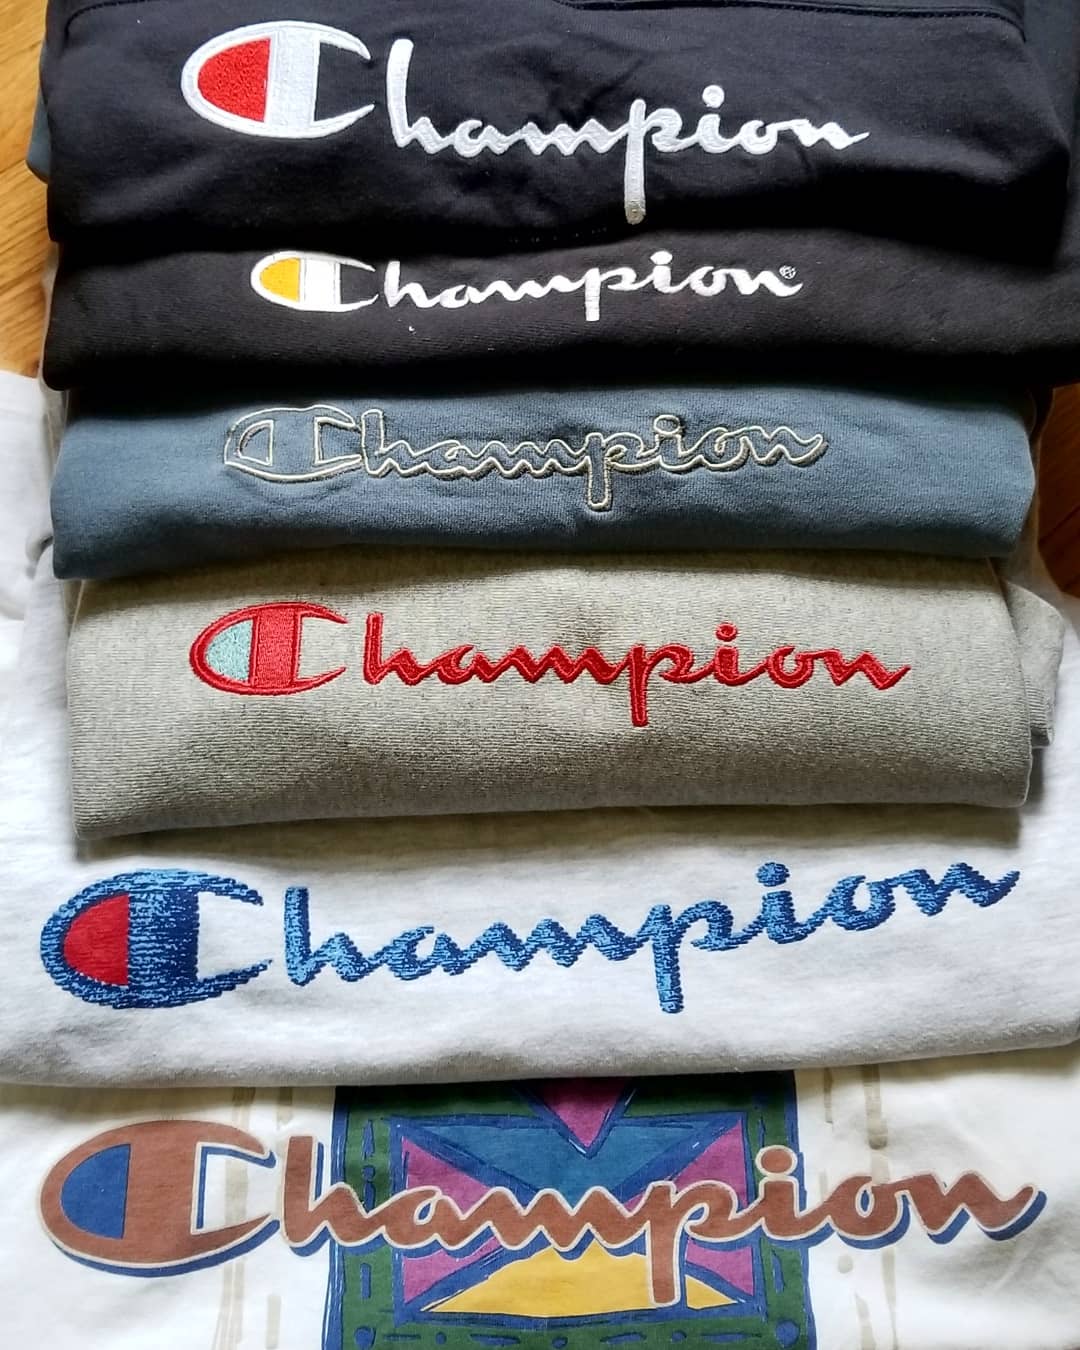 Shout out @luckyfinds_, @waybach_, @jax_vintage, @qgtmvtg, @michiganthrift, @alpo.snow, @lostboys.vintage, @getretrovtg, @crazylokovintage and all the others we met today. Good looking out! #champion #vintagechampion